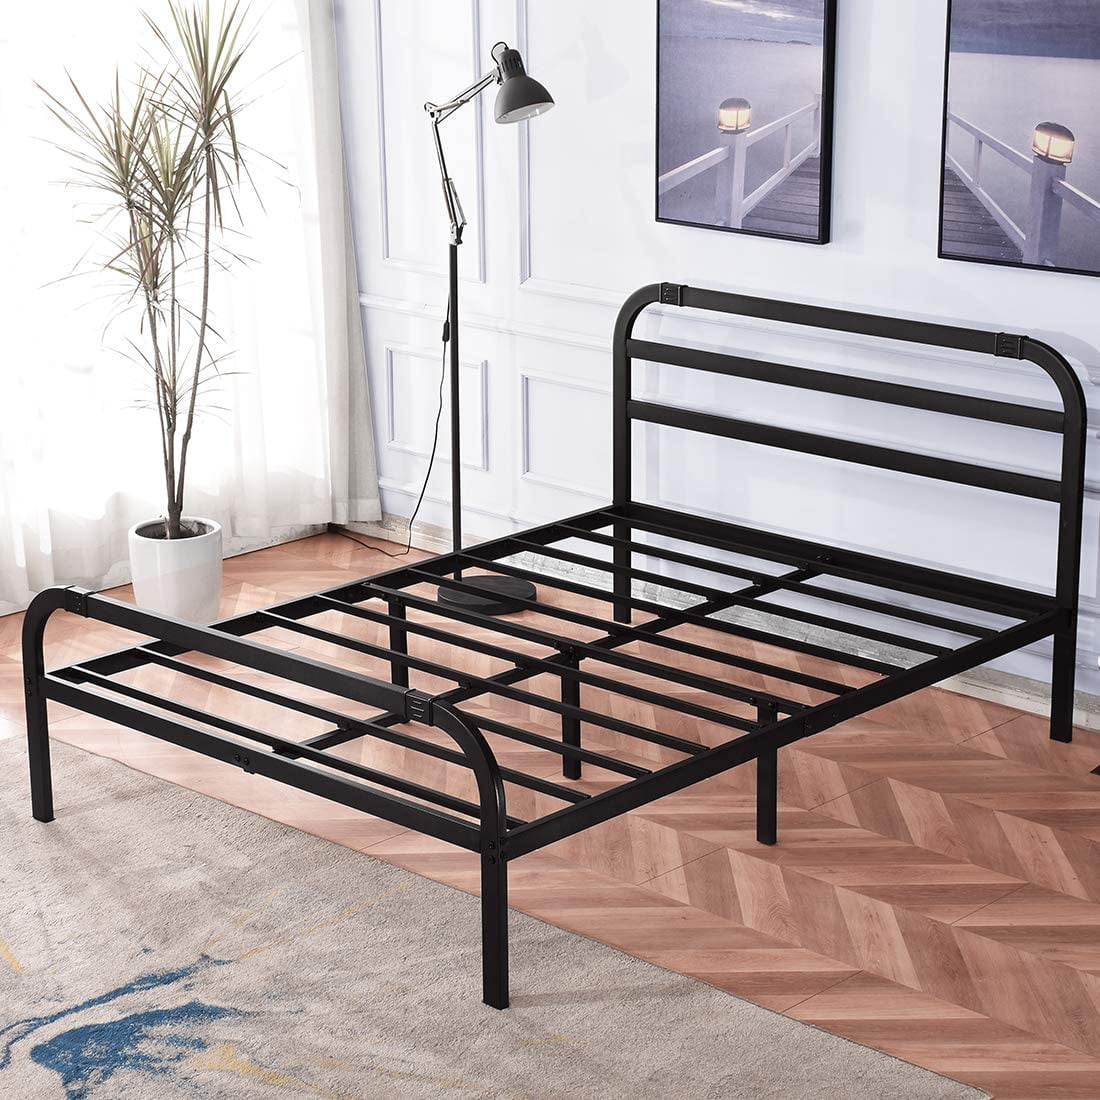 Tatago 14 King Size Bed Frame With, How Much Does A Bed Frame Cost